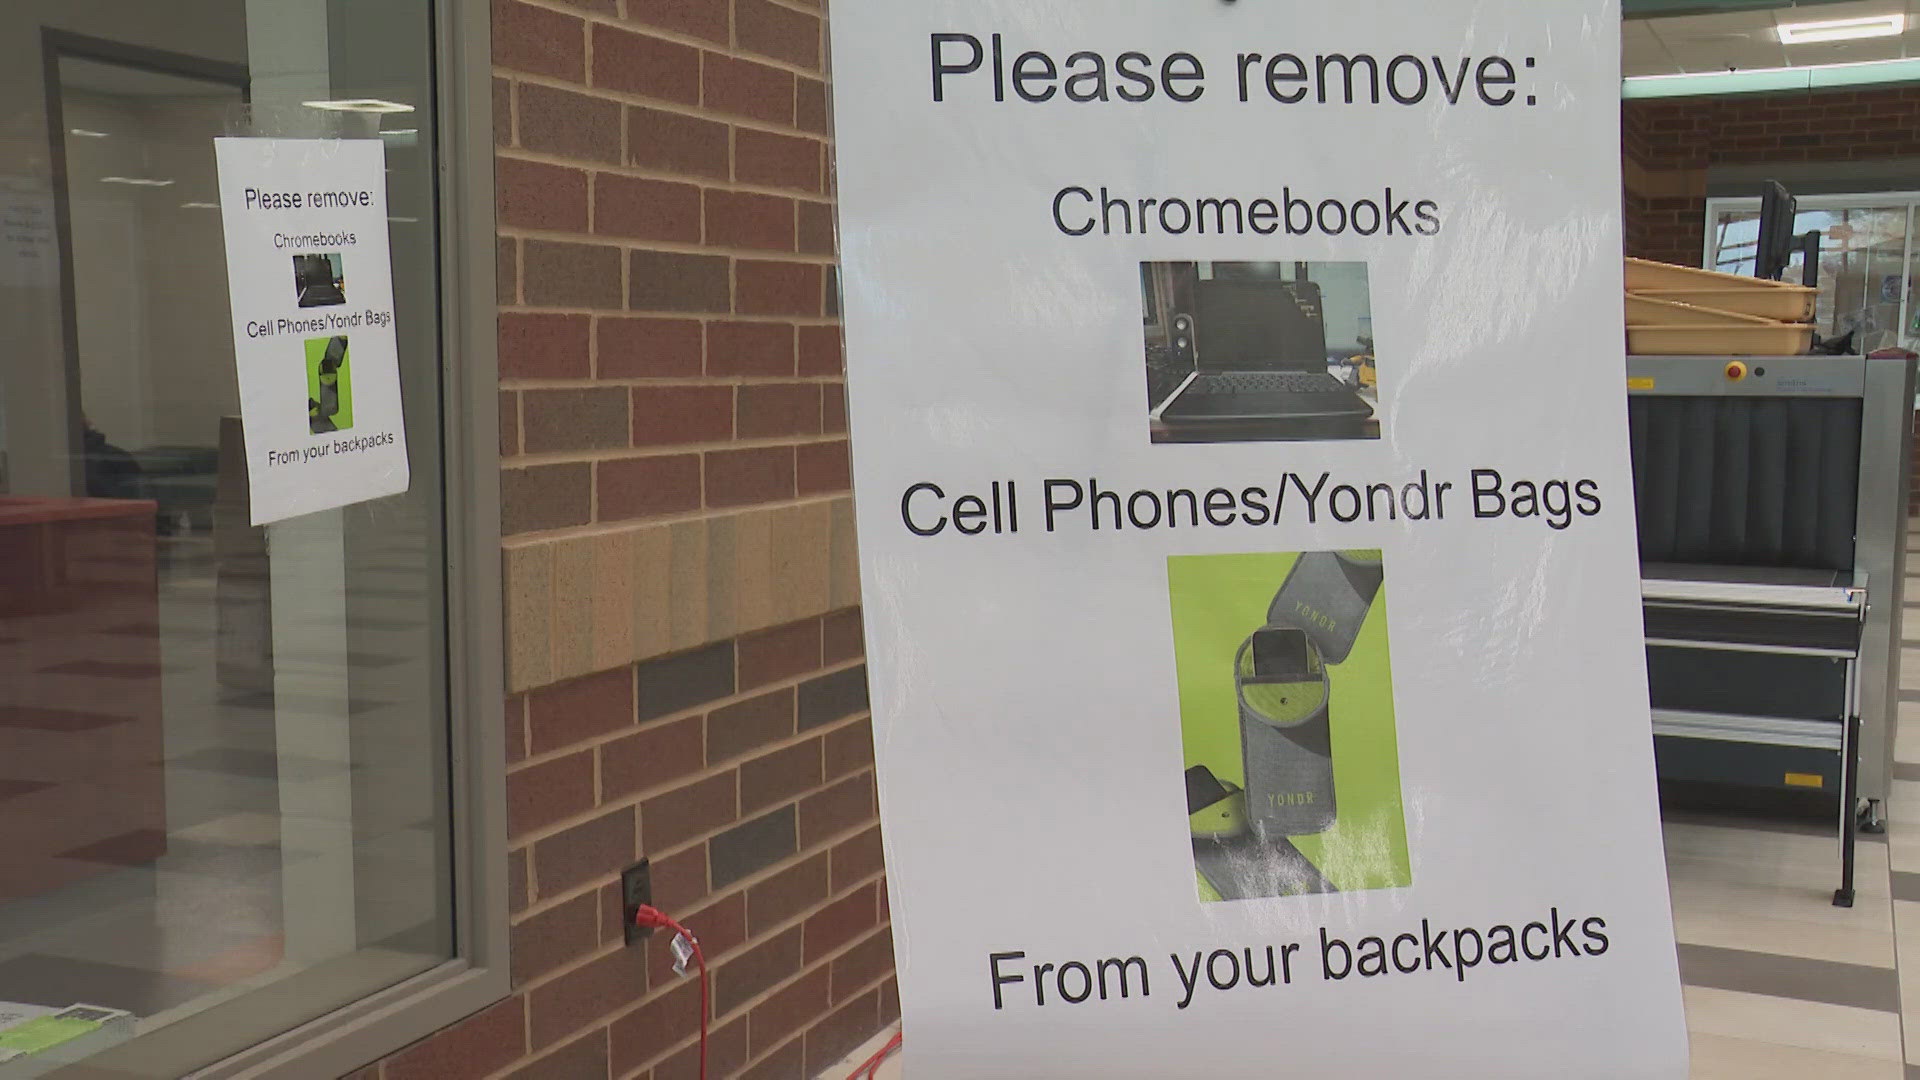 Akron Public Schools started a strict ban on cellphones during the day. It reports the number of fights has dropped significantly from year-to-year.